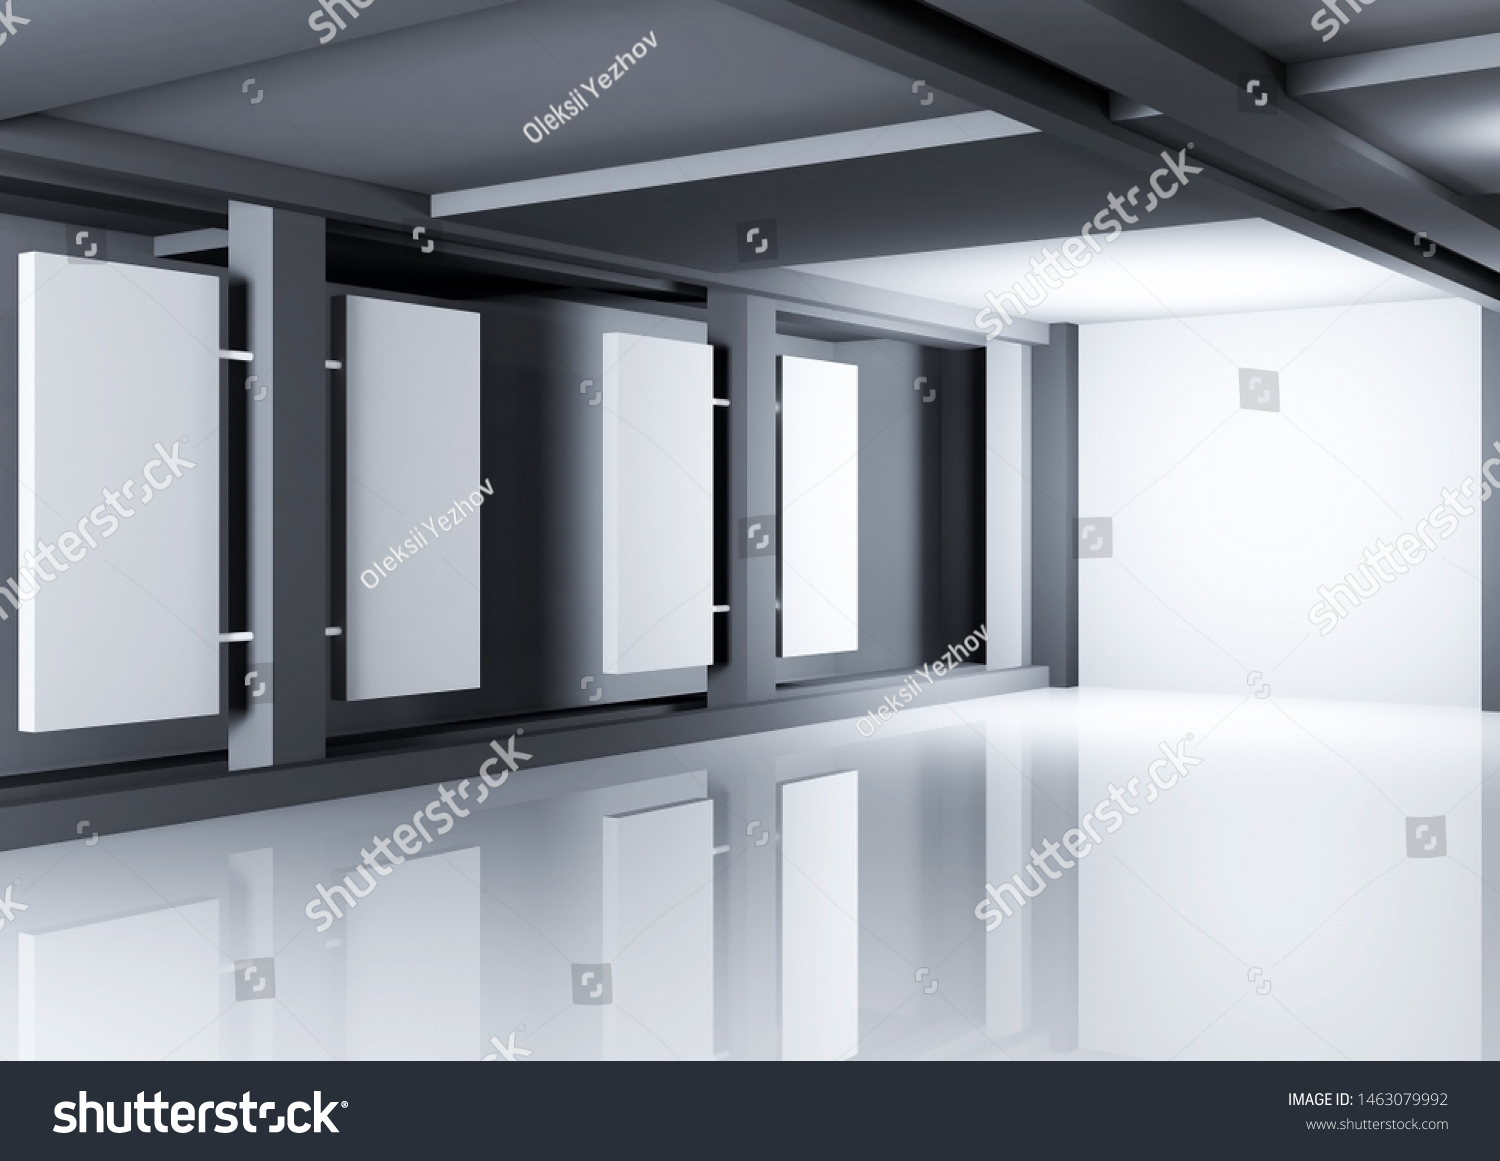 Showroom Interior Architectural Background Blank Room Stock ...